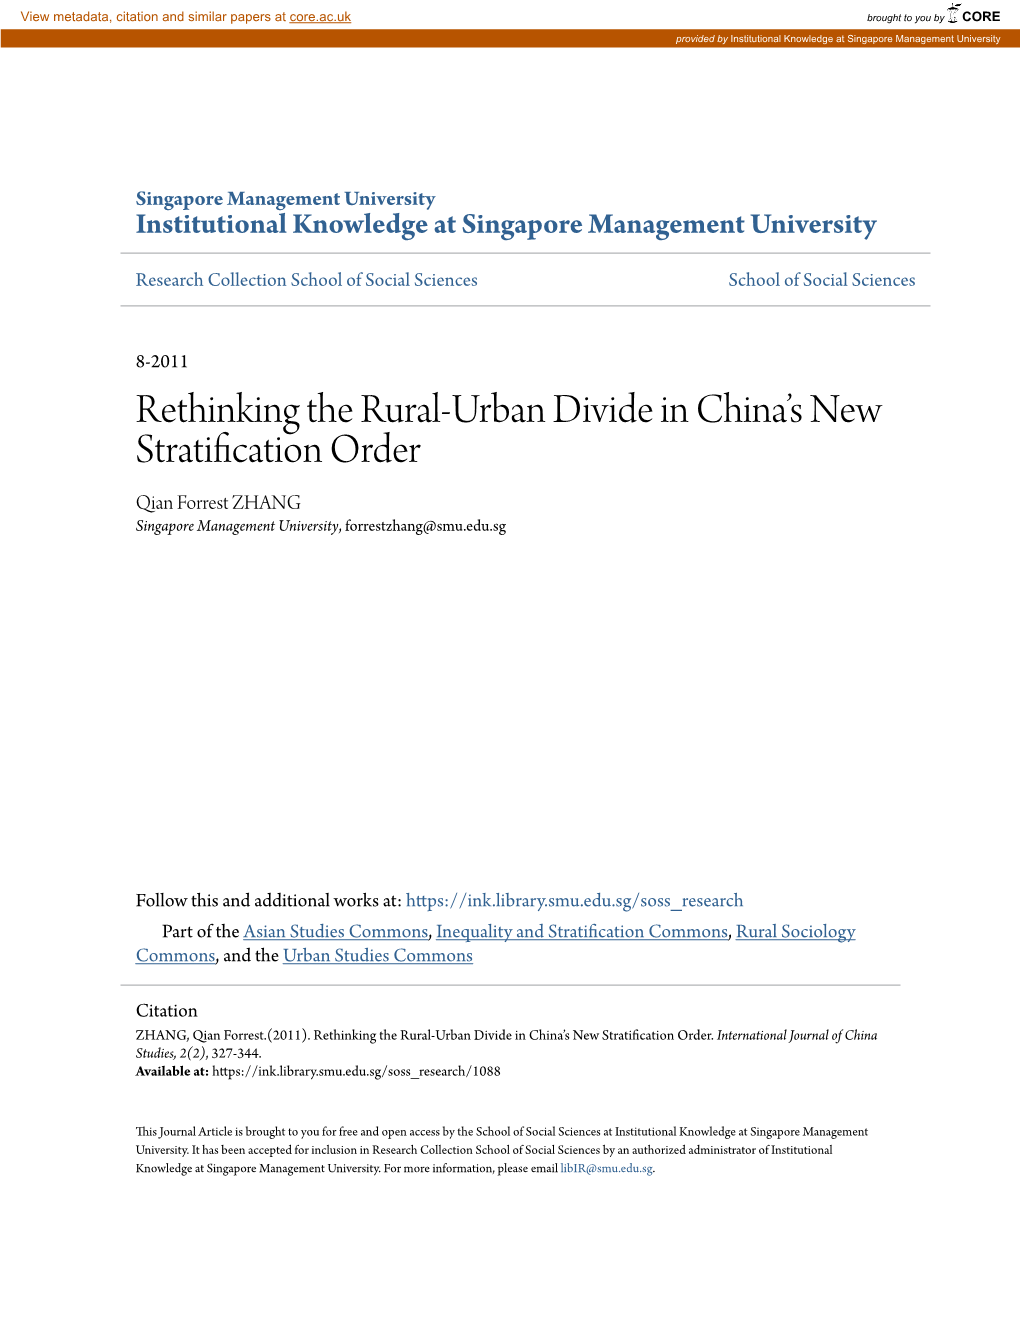 Rethinking the Rural-Urban Divide in China's New Stratification